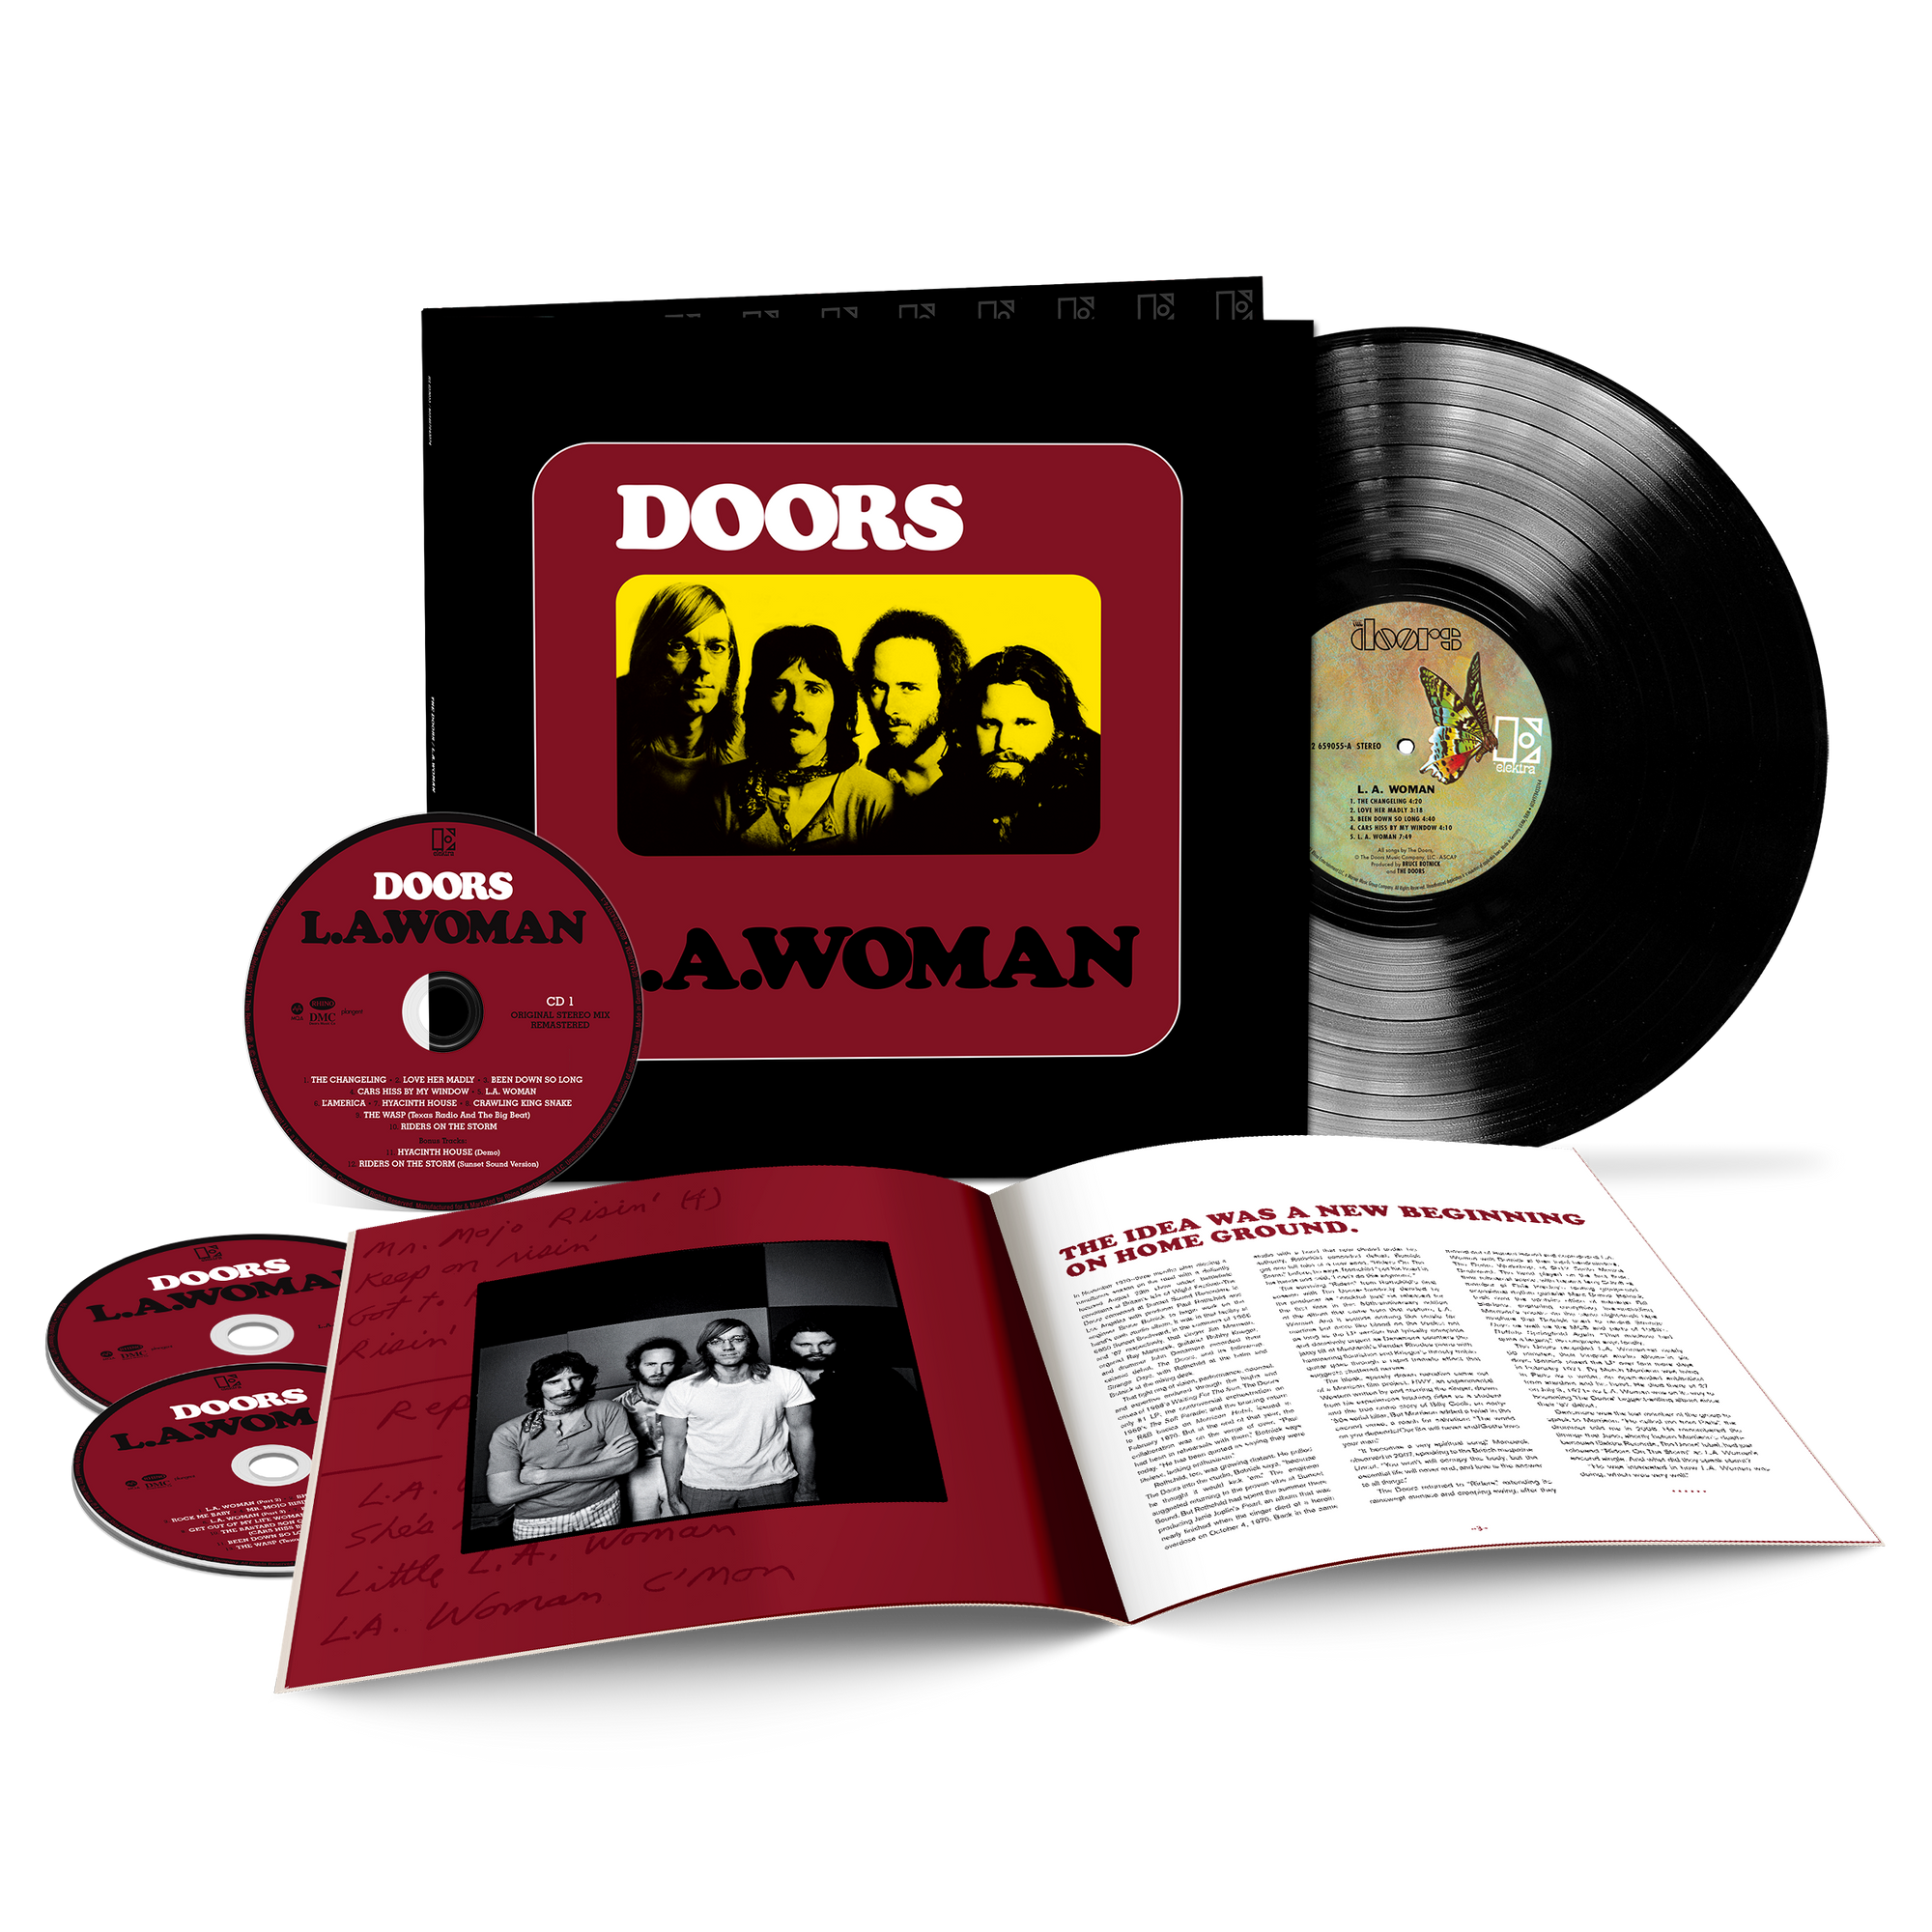 L.A. Woman 50th Anniversary Deluxe Edition 3 CD/1 LP